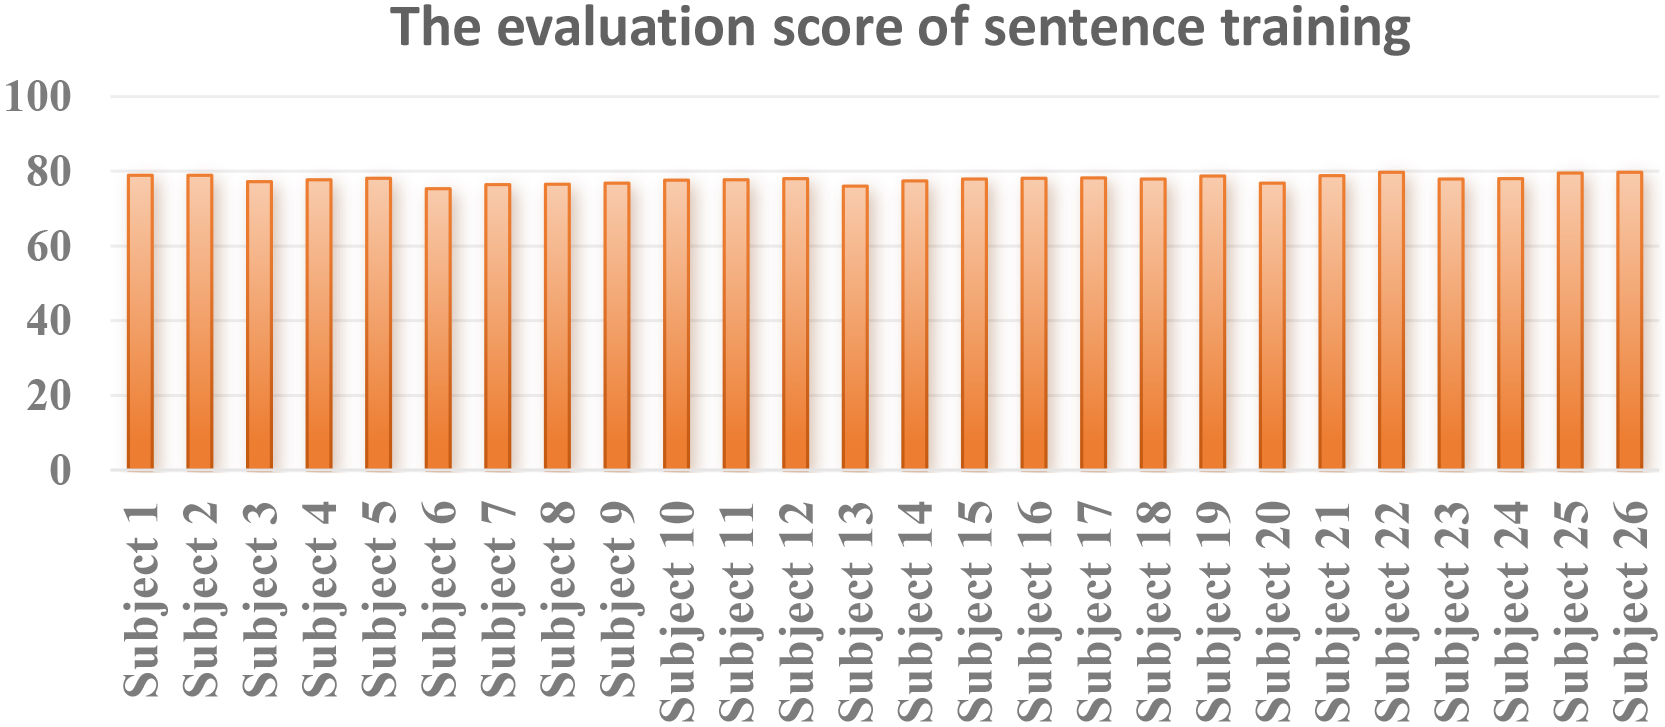 The evaluation scores of sentence training by ARST algorithm.